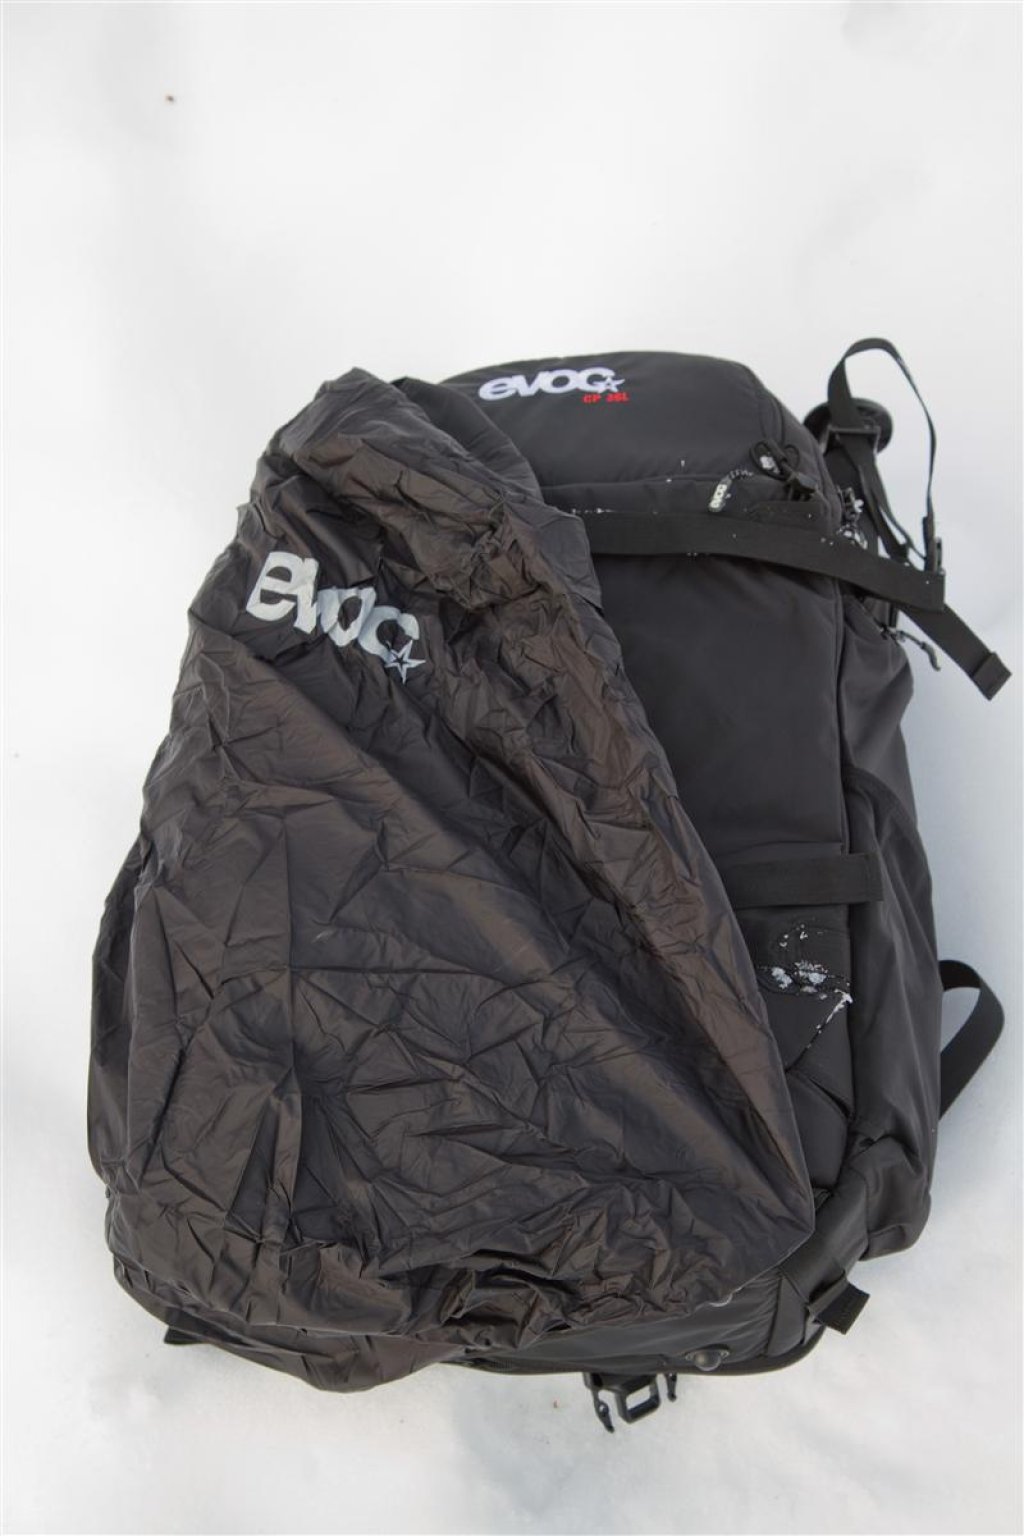 The integrated rain cover is removable and is stored in a compartment in the bottom of the backpack